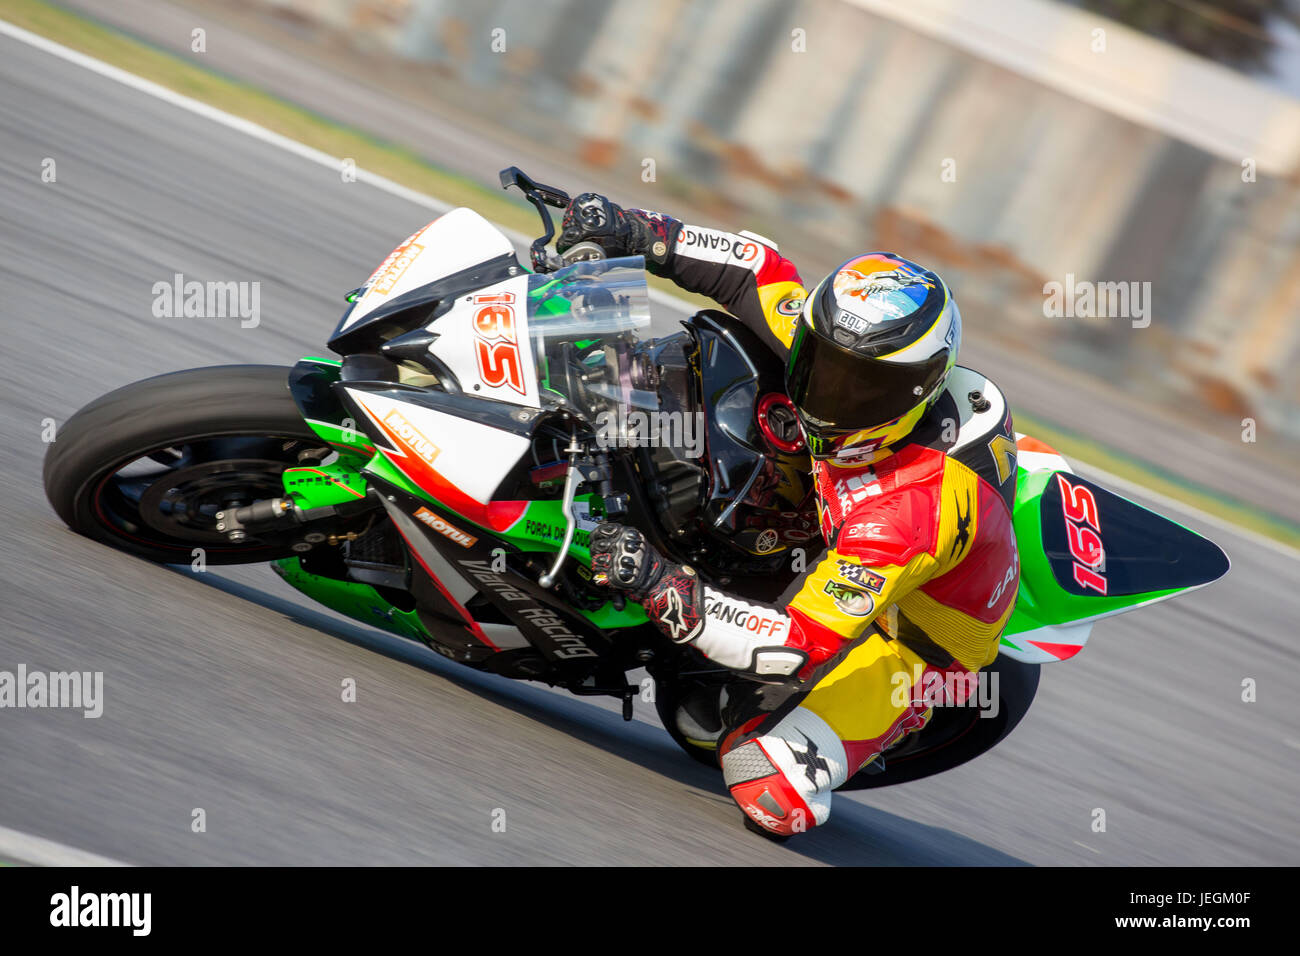 June 24, 2017 - Sao Paulo, Sao Paulo, Brazil - Qualifying sessions for the 3rd stage of the Brazilian Superbike Championship 1000cc, at the Interlagos circuit in Sao Paulo, this Saturday (24) (Credit Image: © Paulo Lopes via ZUMA Wire) Stock Photo